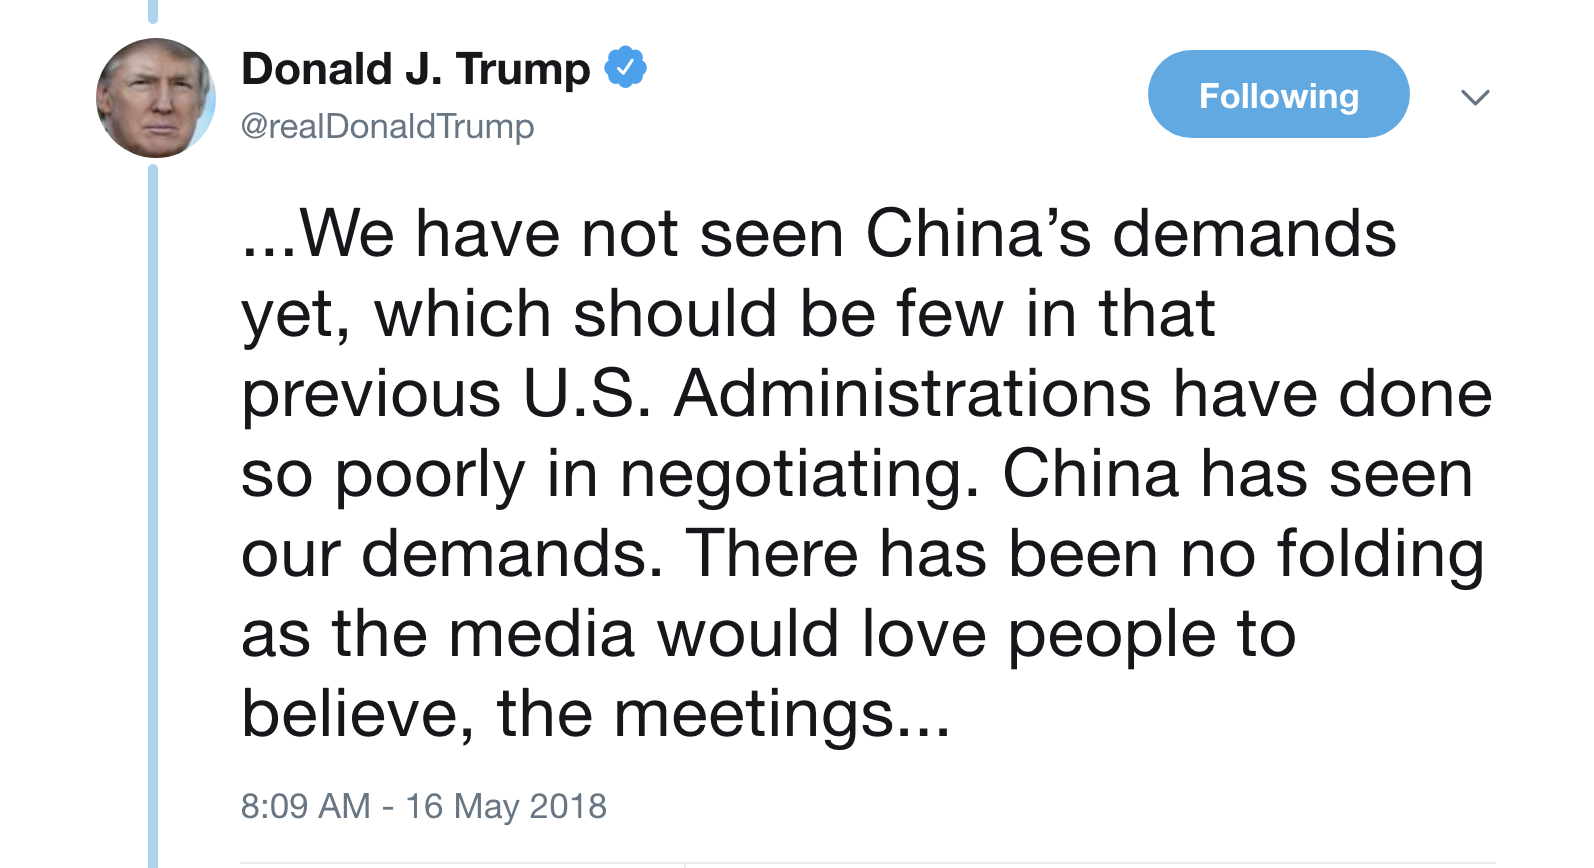 Screen-Shot-2018-05-16-at-8.15.48-AM Trump Responds To $500 Million China Gift Scandal On Twitter Like A Traitor To U.S. Corruption Crime Donald Trump Foreign Policy Politics Top Stories 